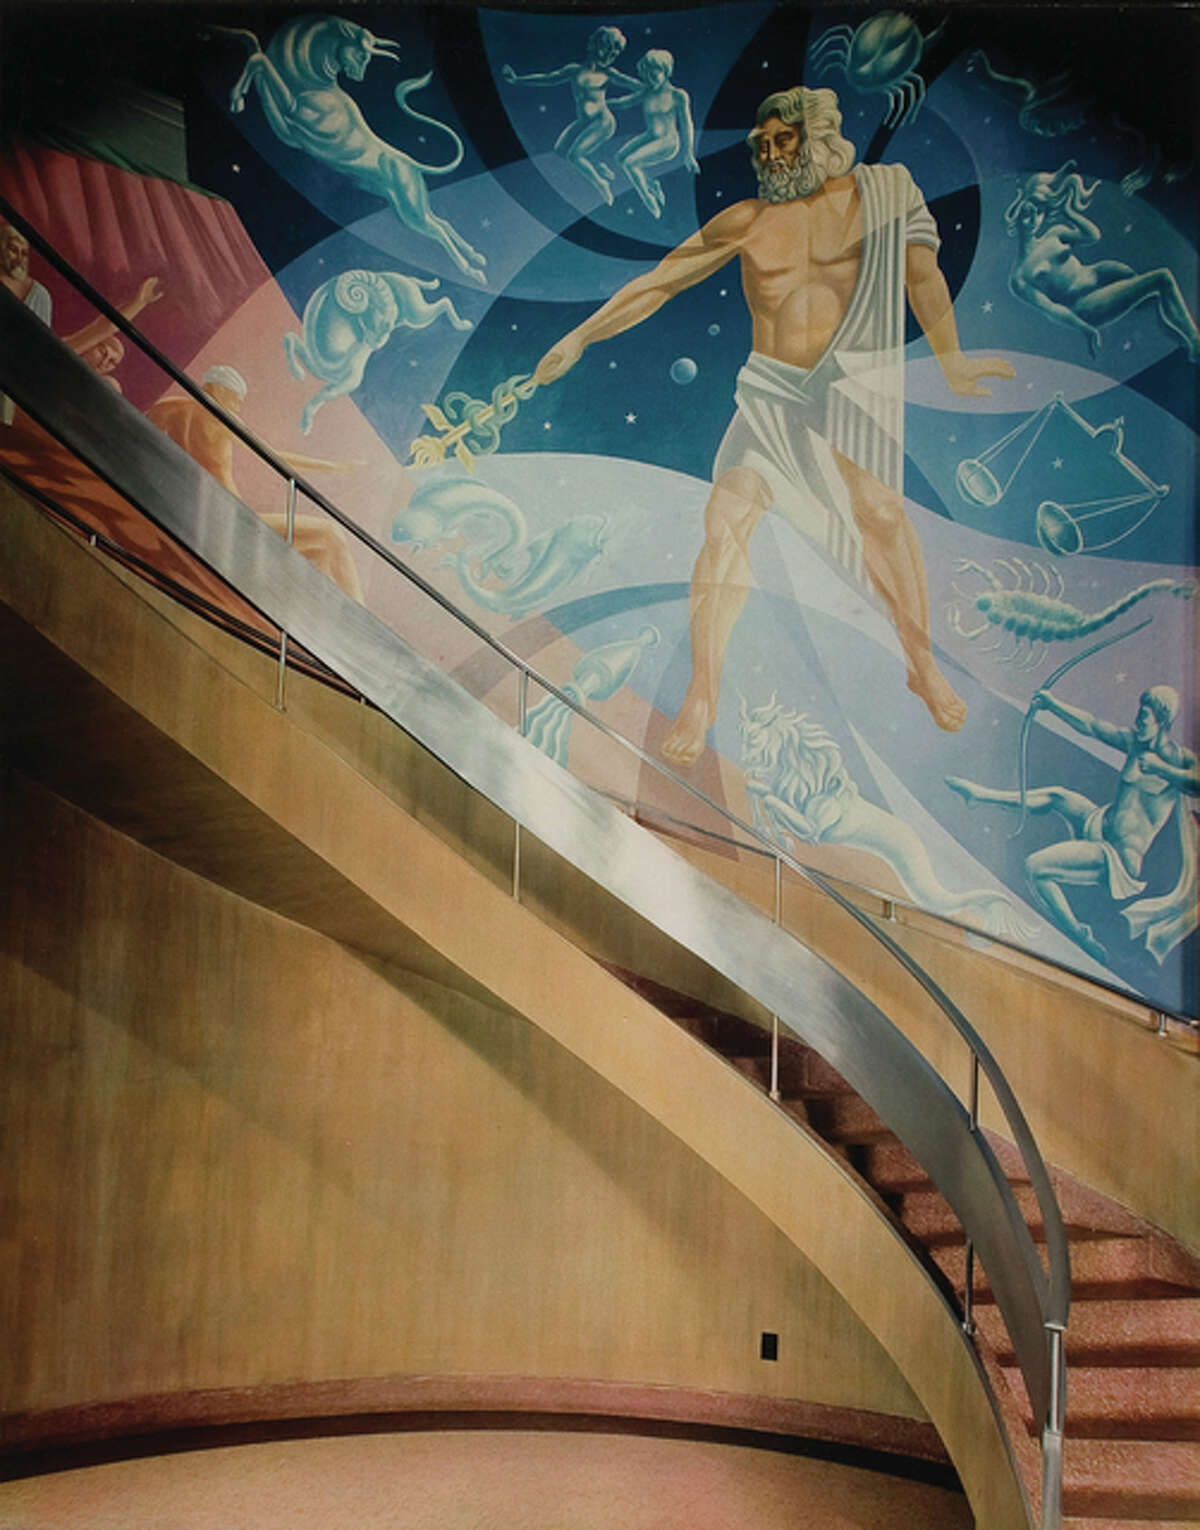 Morton D. May, American, 1914–1983; Staircase Mural No. 1, A. S. Aloe Company (St. Louis), 1940; carbro print; Saint Louis Art Museum, Gift of Morton D. May 322:1979